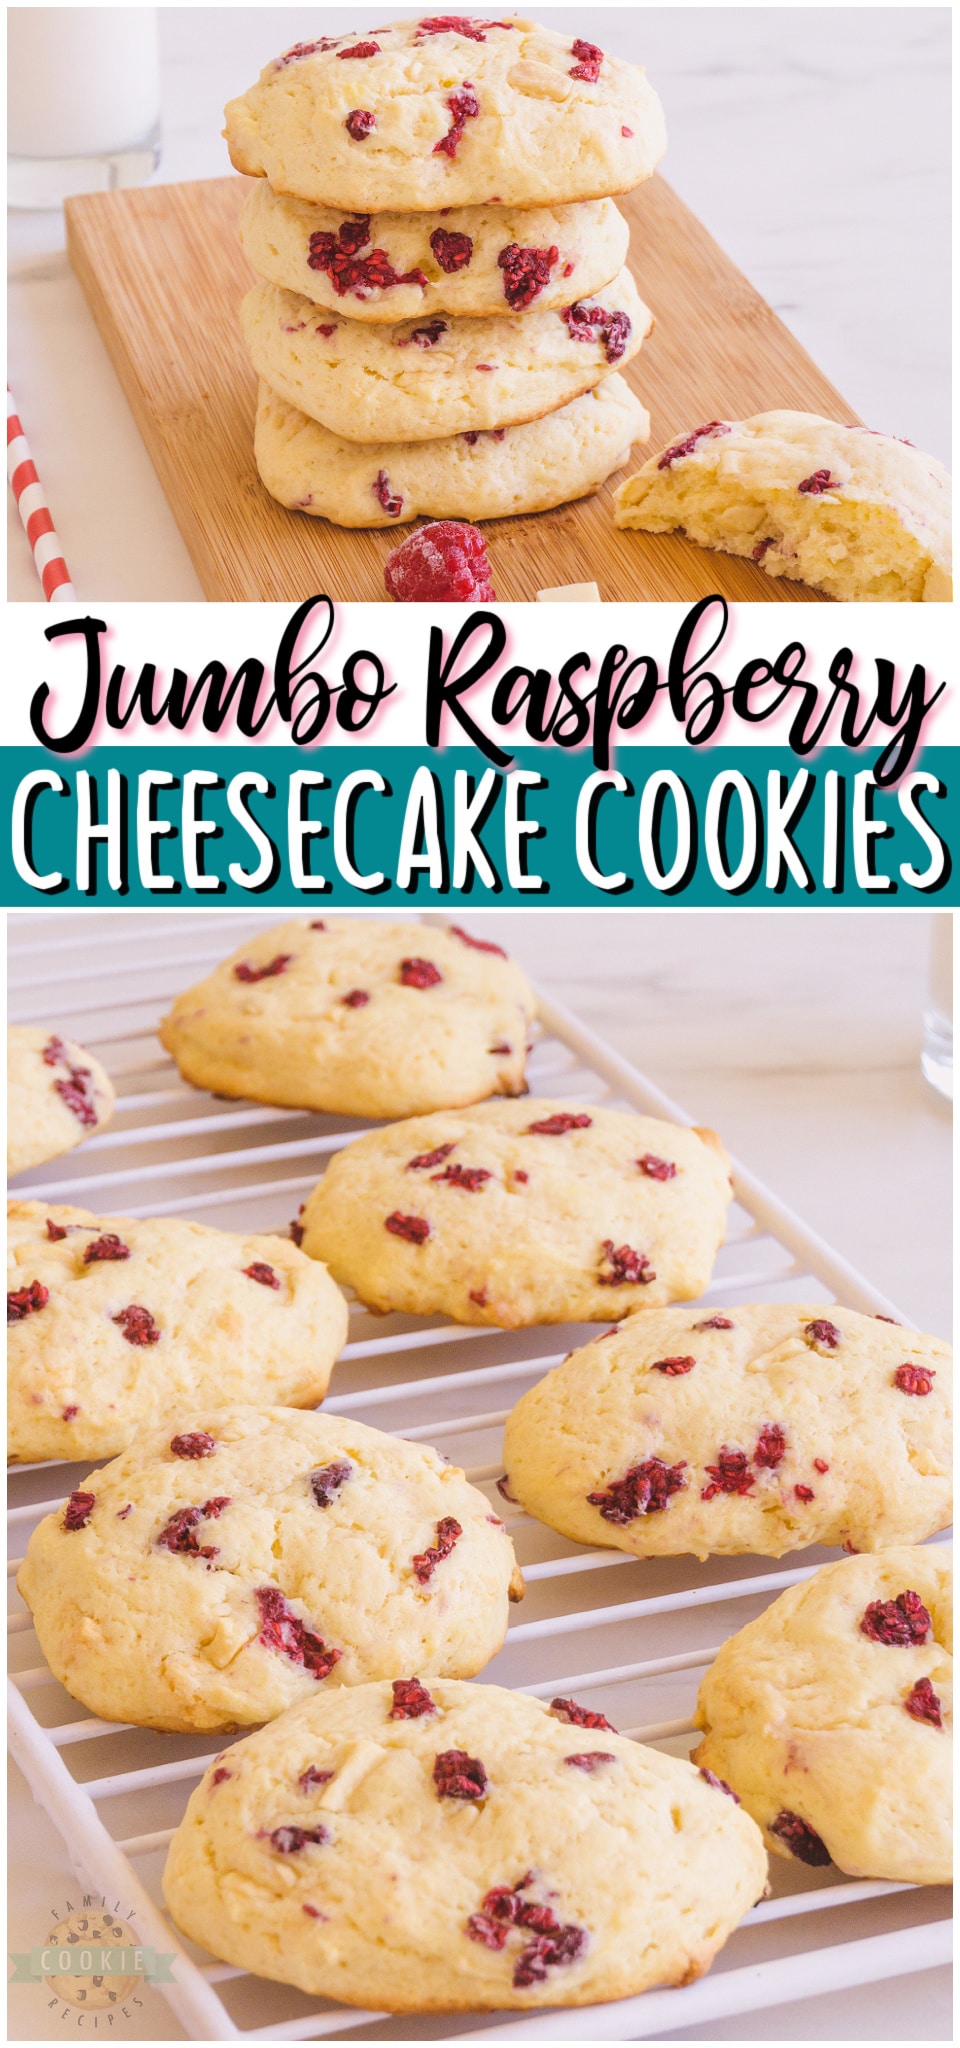 Giant raspberry cheesecake cookies are rich & indulgent cookies made with cream cheese, white chocolate & raspberries! Jumbo sized cheesecake cookies with bright raspberry flavor that everyone loves! 